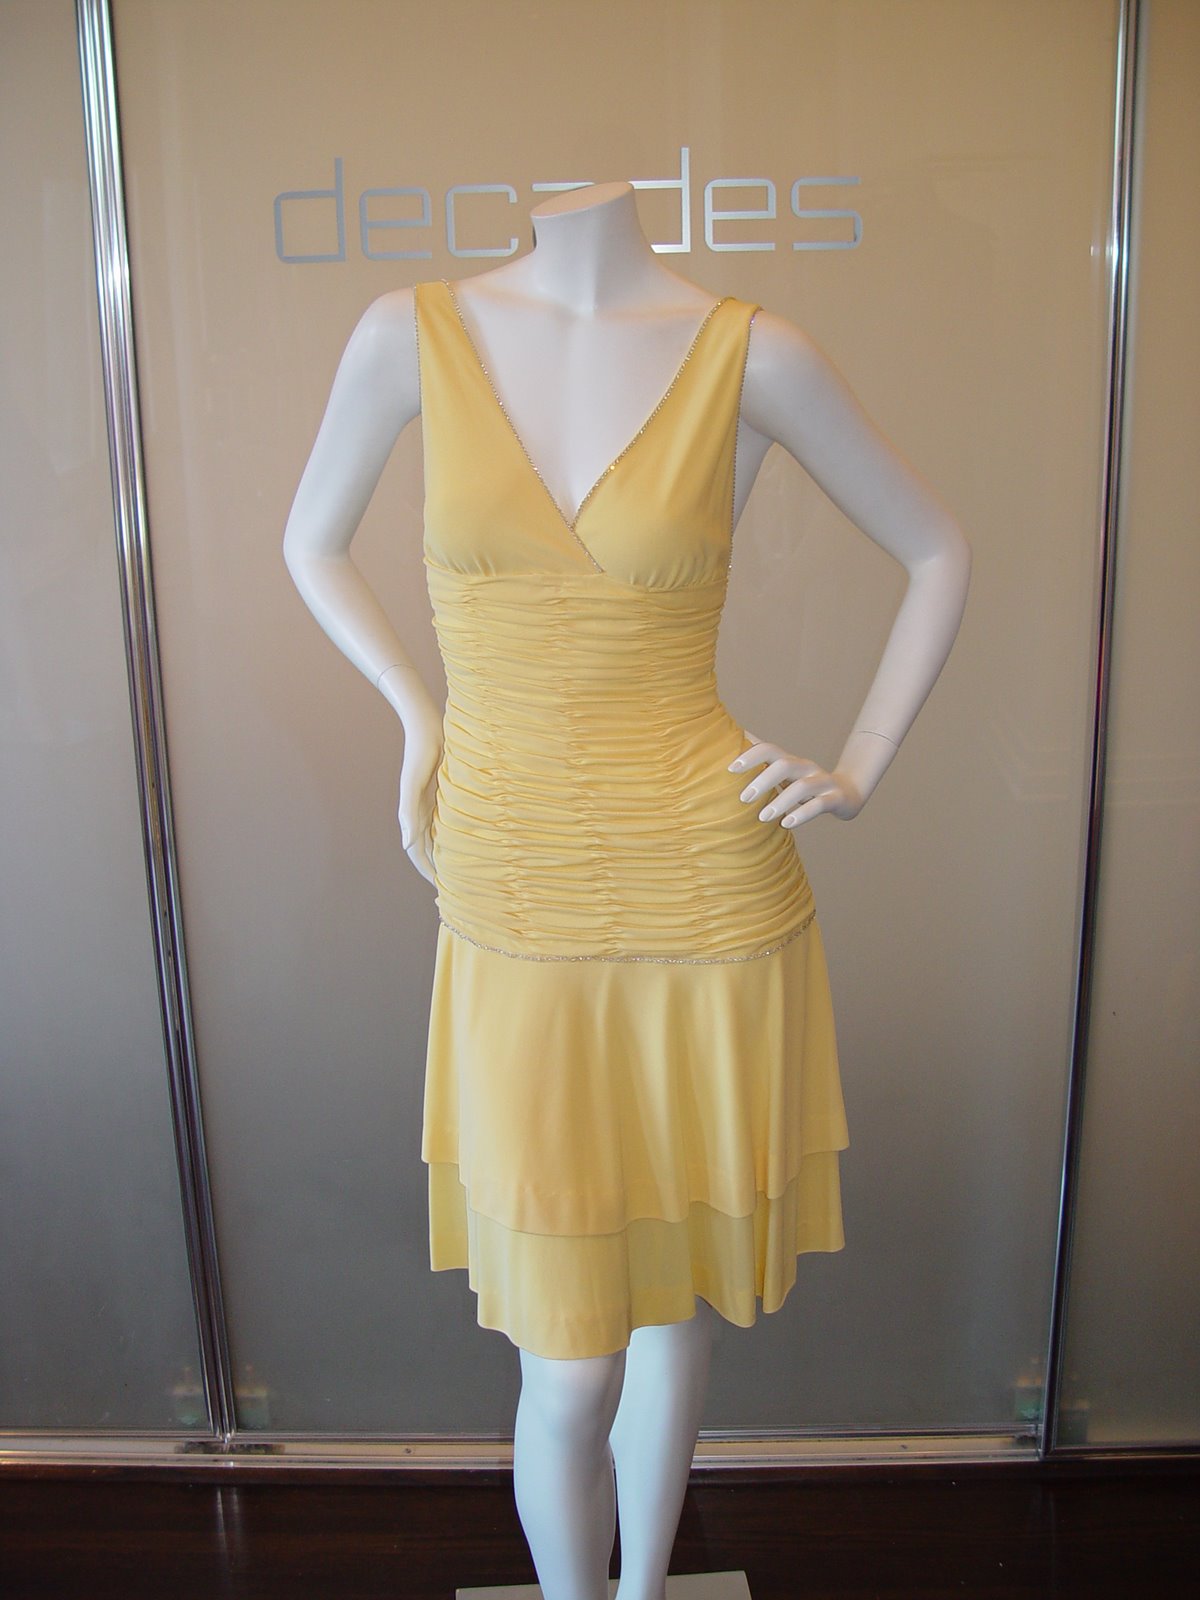 [LORIS+AZZARO+LEMON+HALTER+DRESS+WITH+RUCHED+JERSEY+AND+TIERED+SKIRT+C+80S.JPG+(1).JPG]